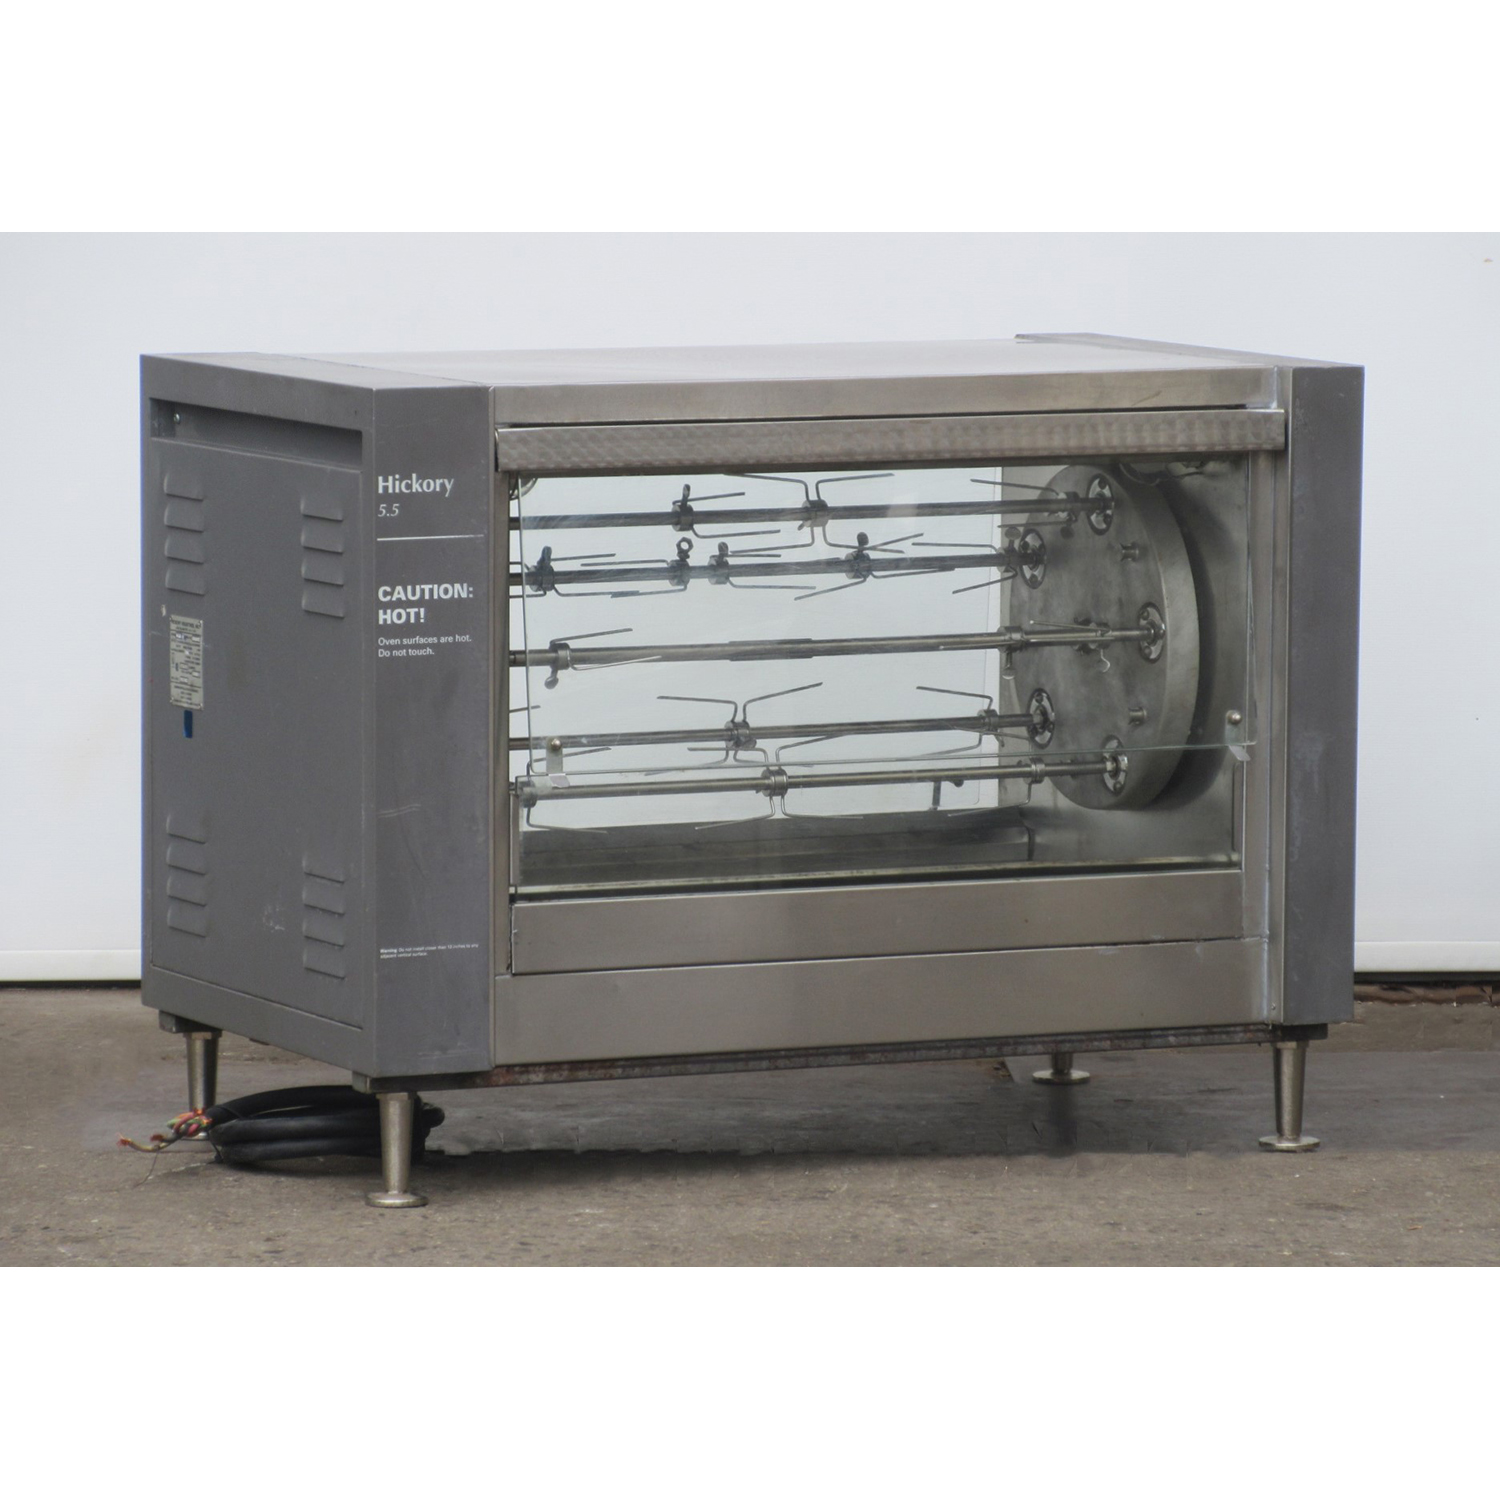 Hickory N/5.5 E Rotisserie 5 Spit, Electric, Used Excellent Condition image 4